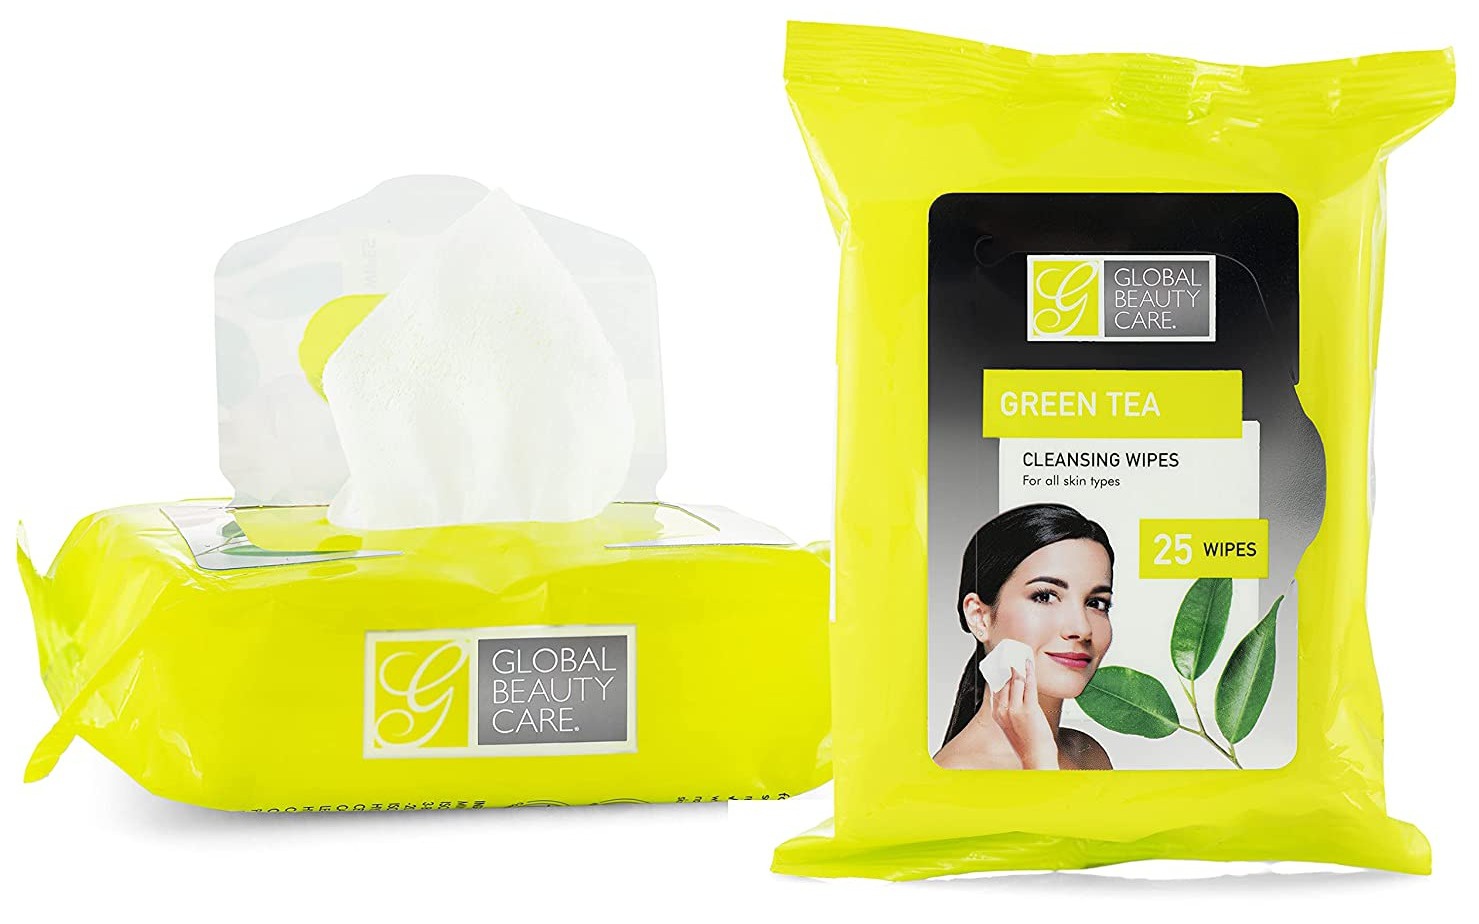 Global Beauty Care Green Tea Cleansing Wipes